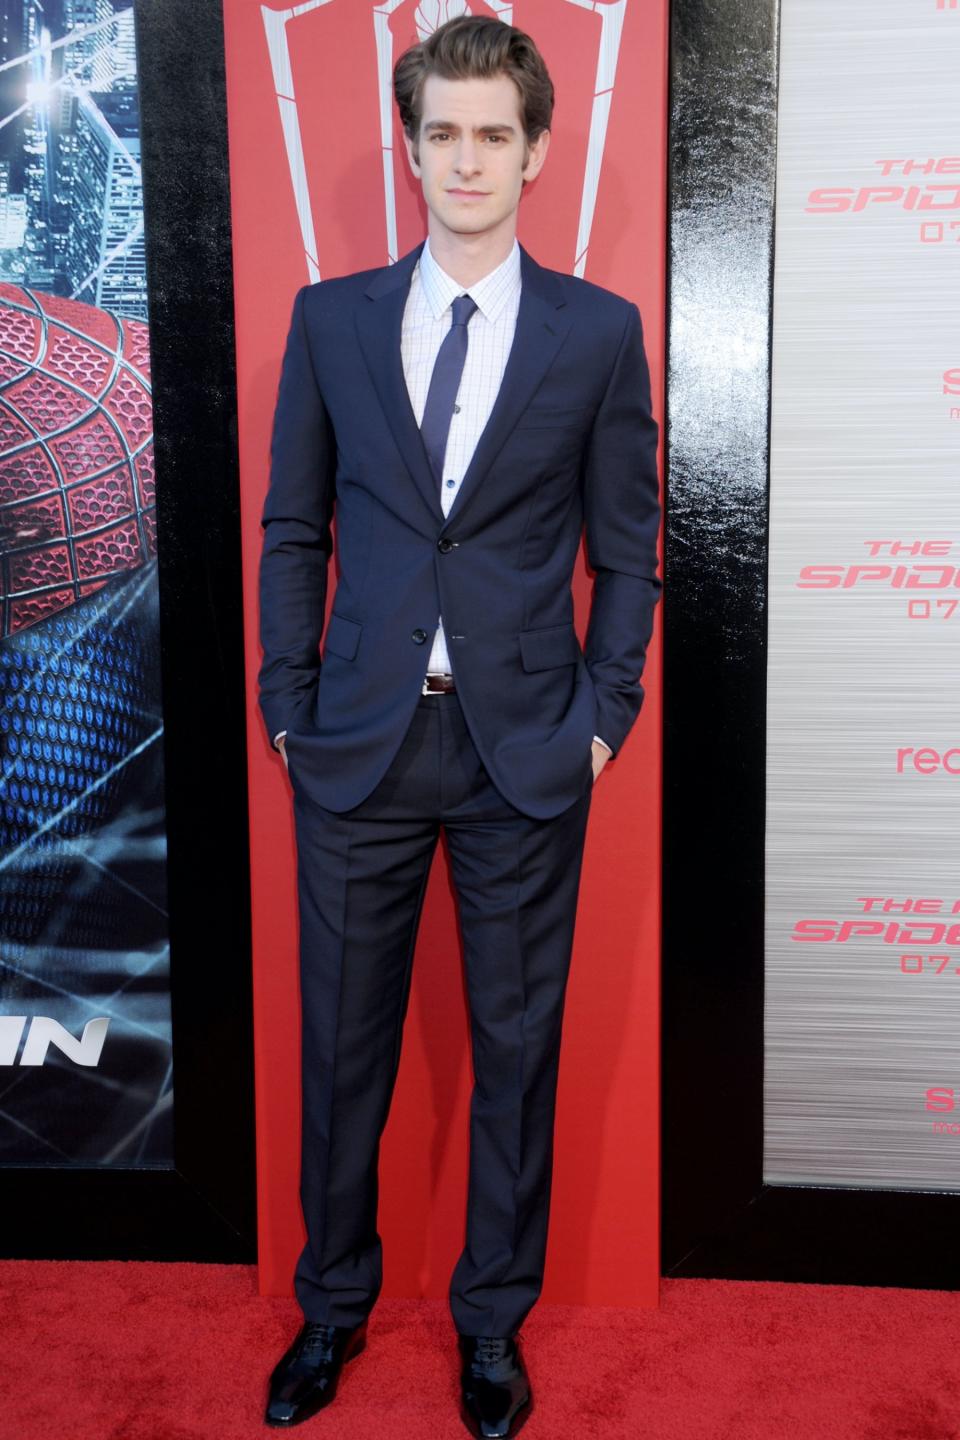 Andrew Garfield, Amazing Spider-Man, menswear, brogues, black leather shoes, premiere, celebrity style, mens style, celebrity red carpet, red carpet